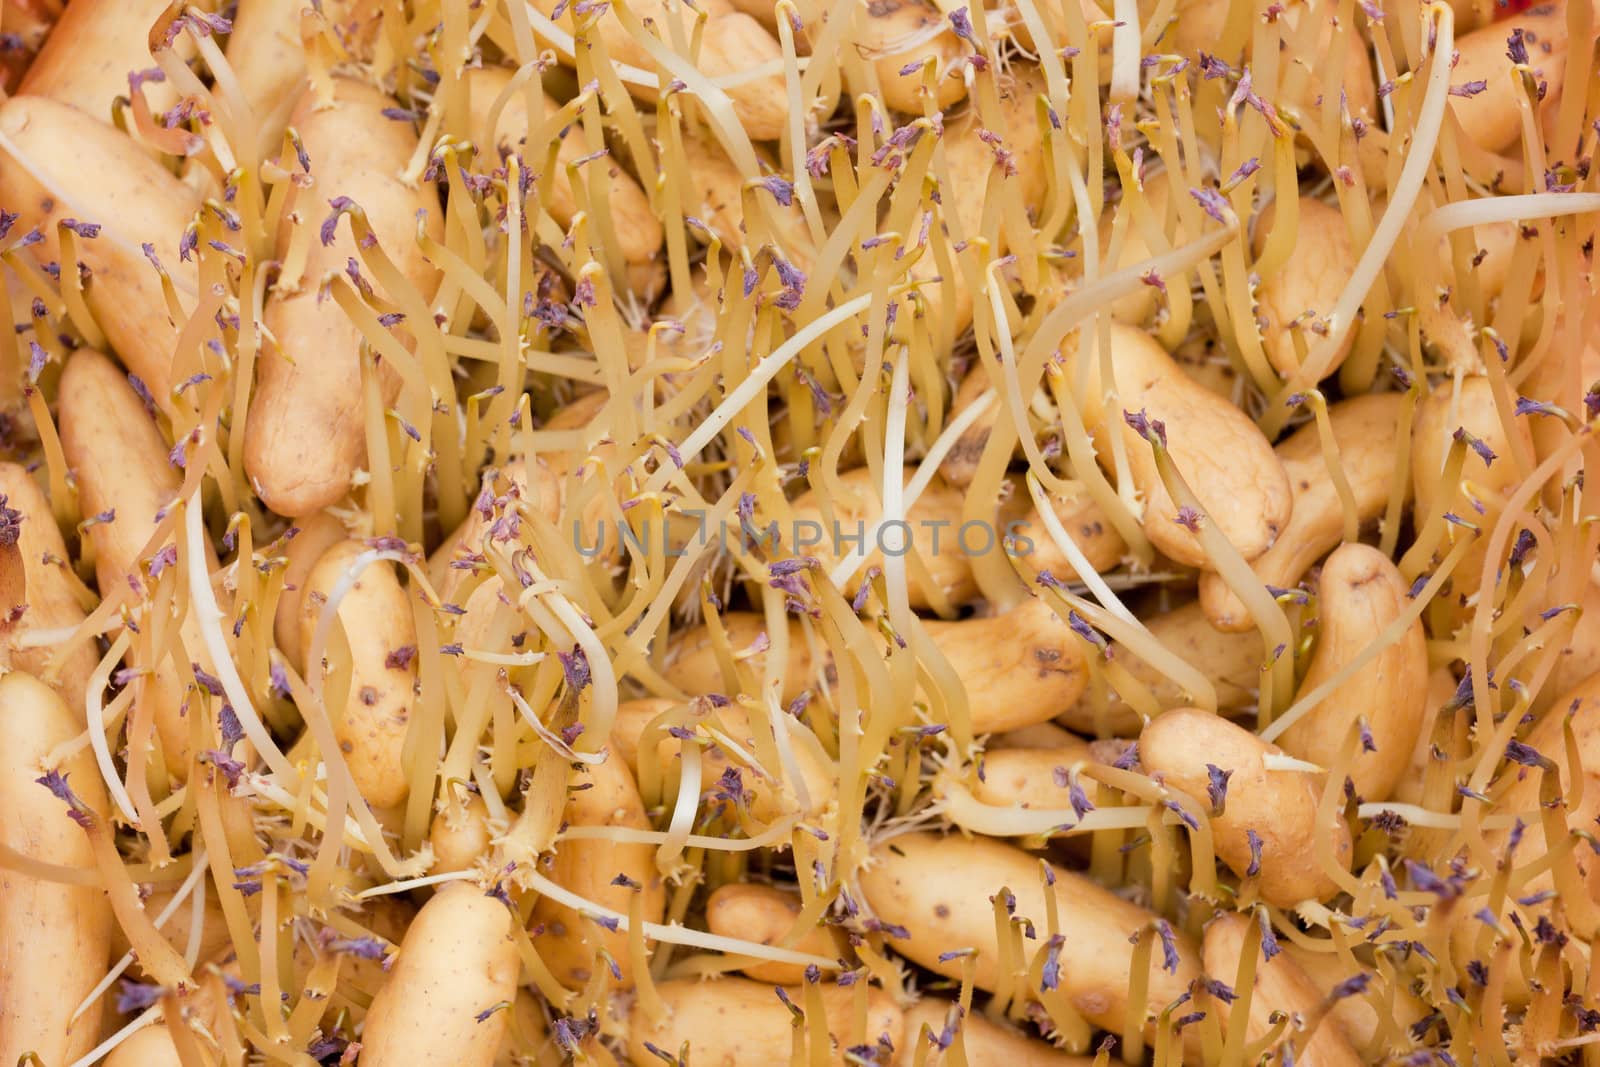 Sprouting Russian Banana Fingerling seed potatoes by PiLens